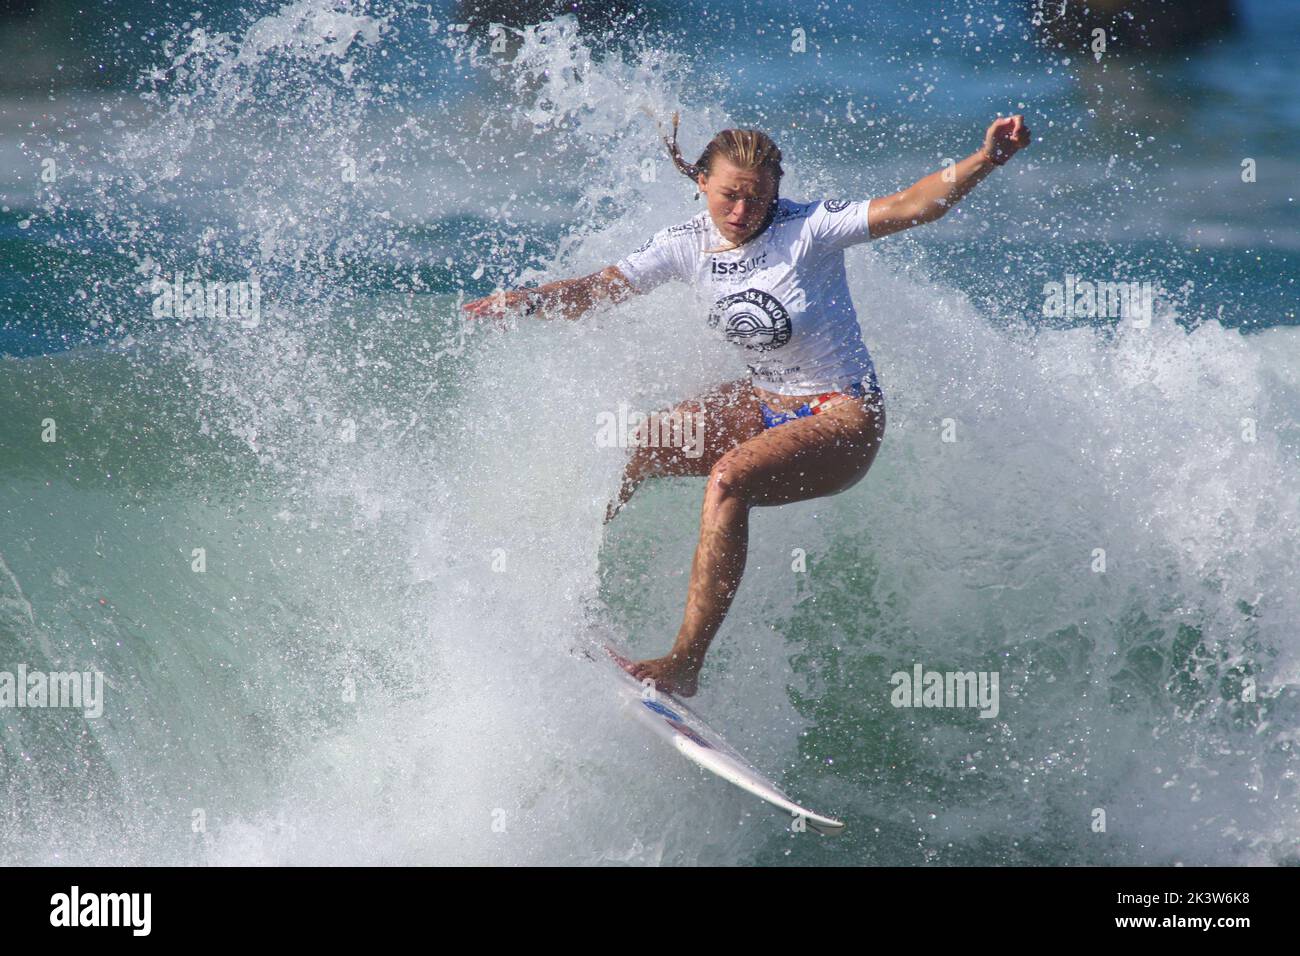 Huntington Beach, California, USA. 24th Sep, 2022. KIRRA PINKERTON, of USA, is seen surfing during the women's surfing final at the ISA World Surfing Games 2022 on Saturday. Pinkerton won the Open Women's Division for Team USA. (Credit Image: © Jon Gaede/ZUMA Press Wire) Stock Photo